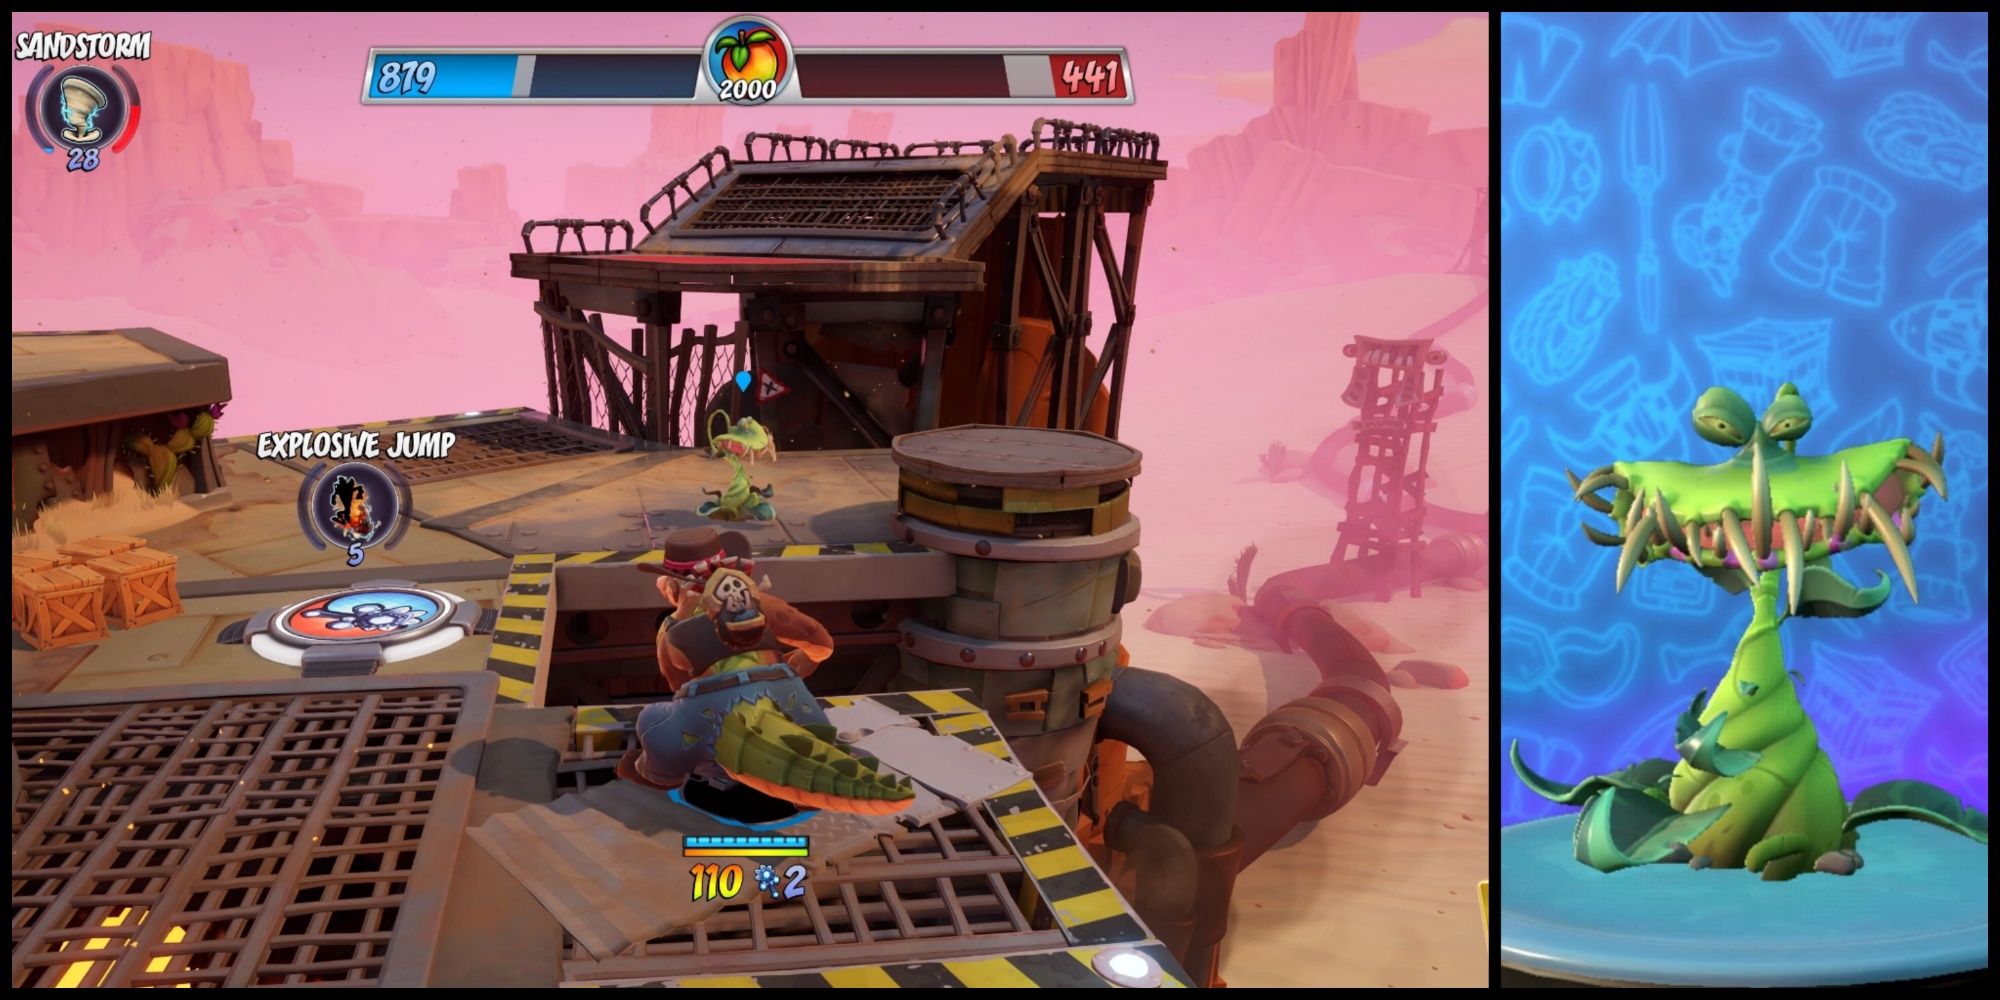 The Flytrap Spitter power from Crash Team Rumble as shown in game and in the main menu